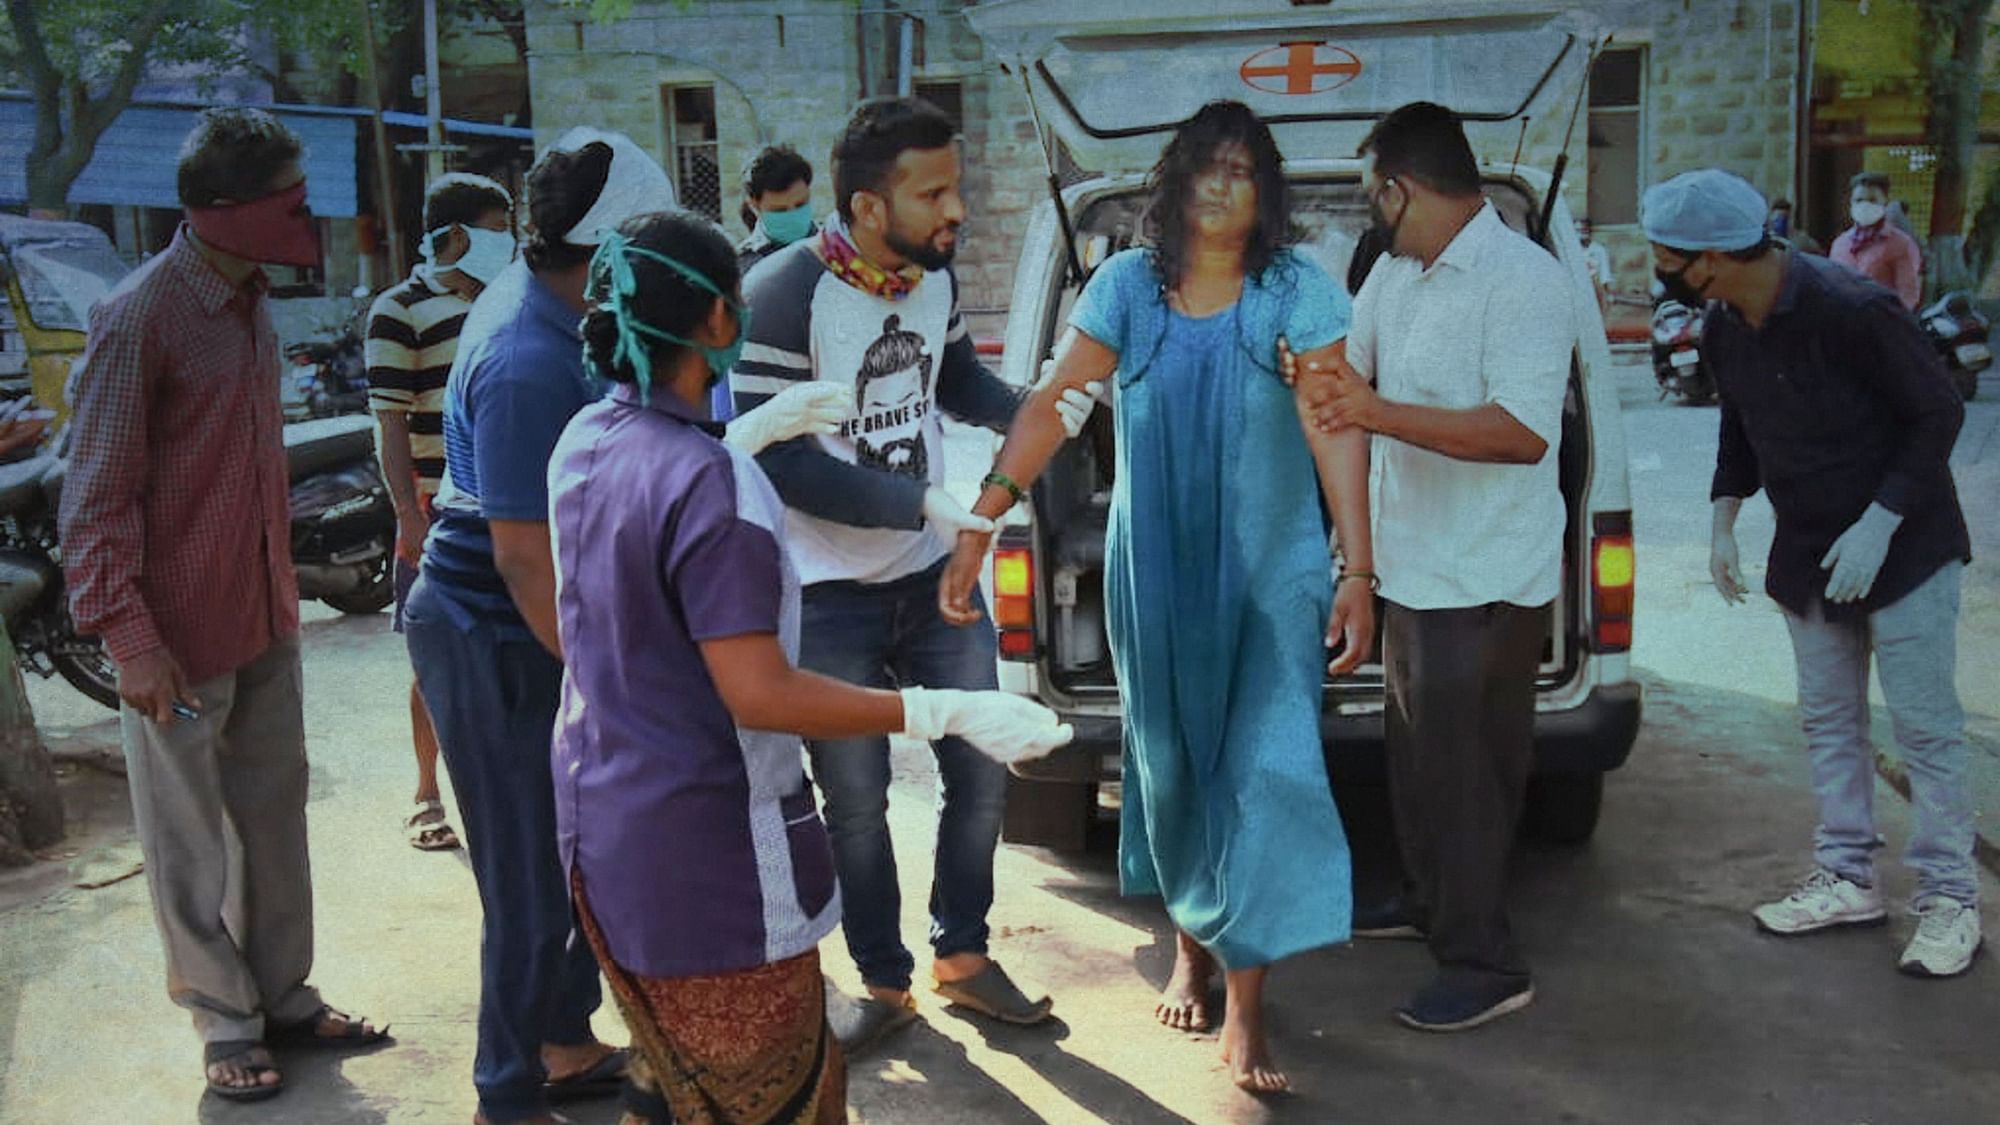 An affected woman being taken for treatment at King George Hospital after the gas leak in RR Venkatapuram village, Visakhapatnam.